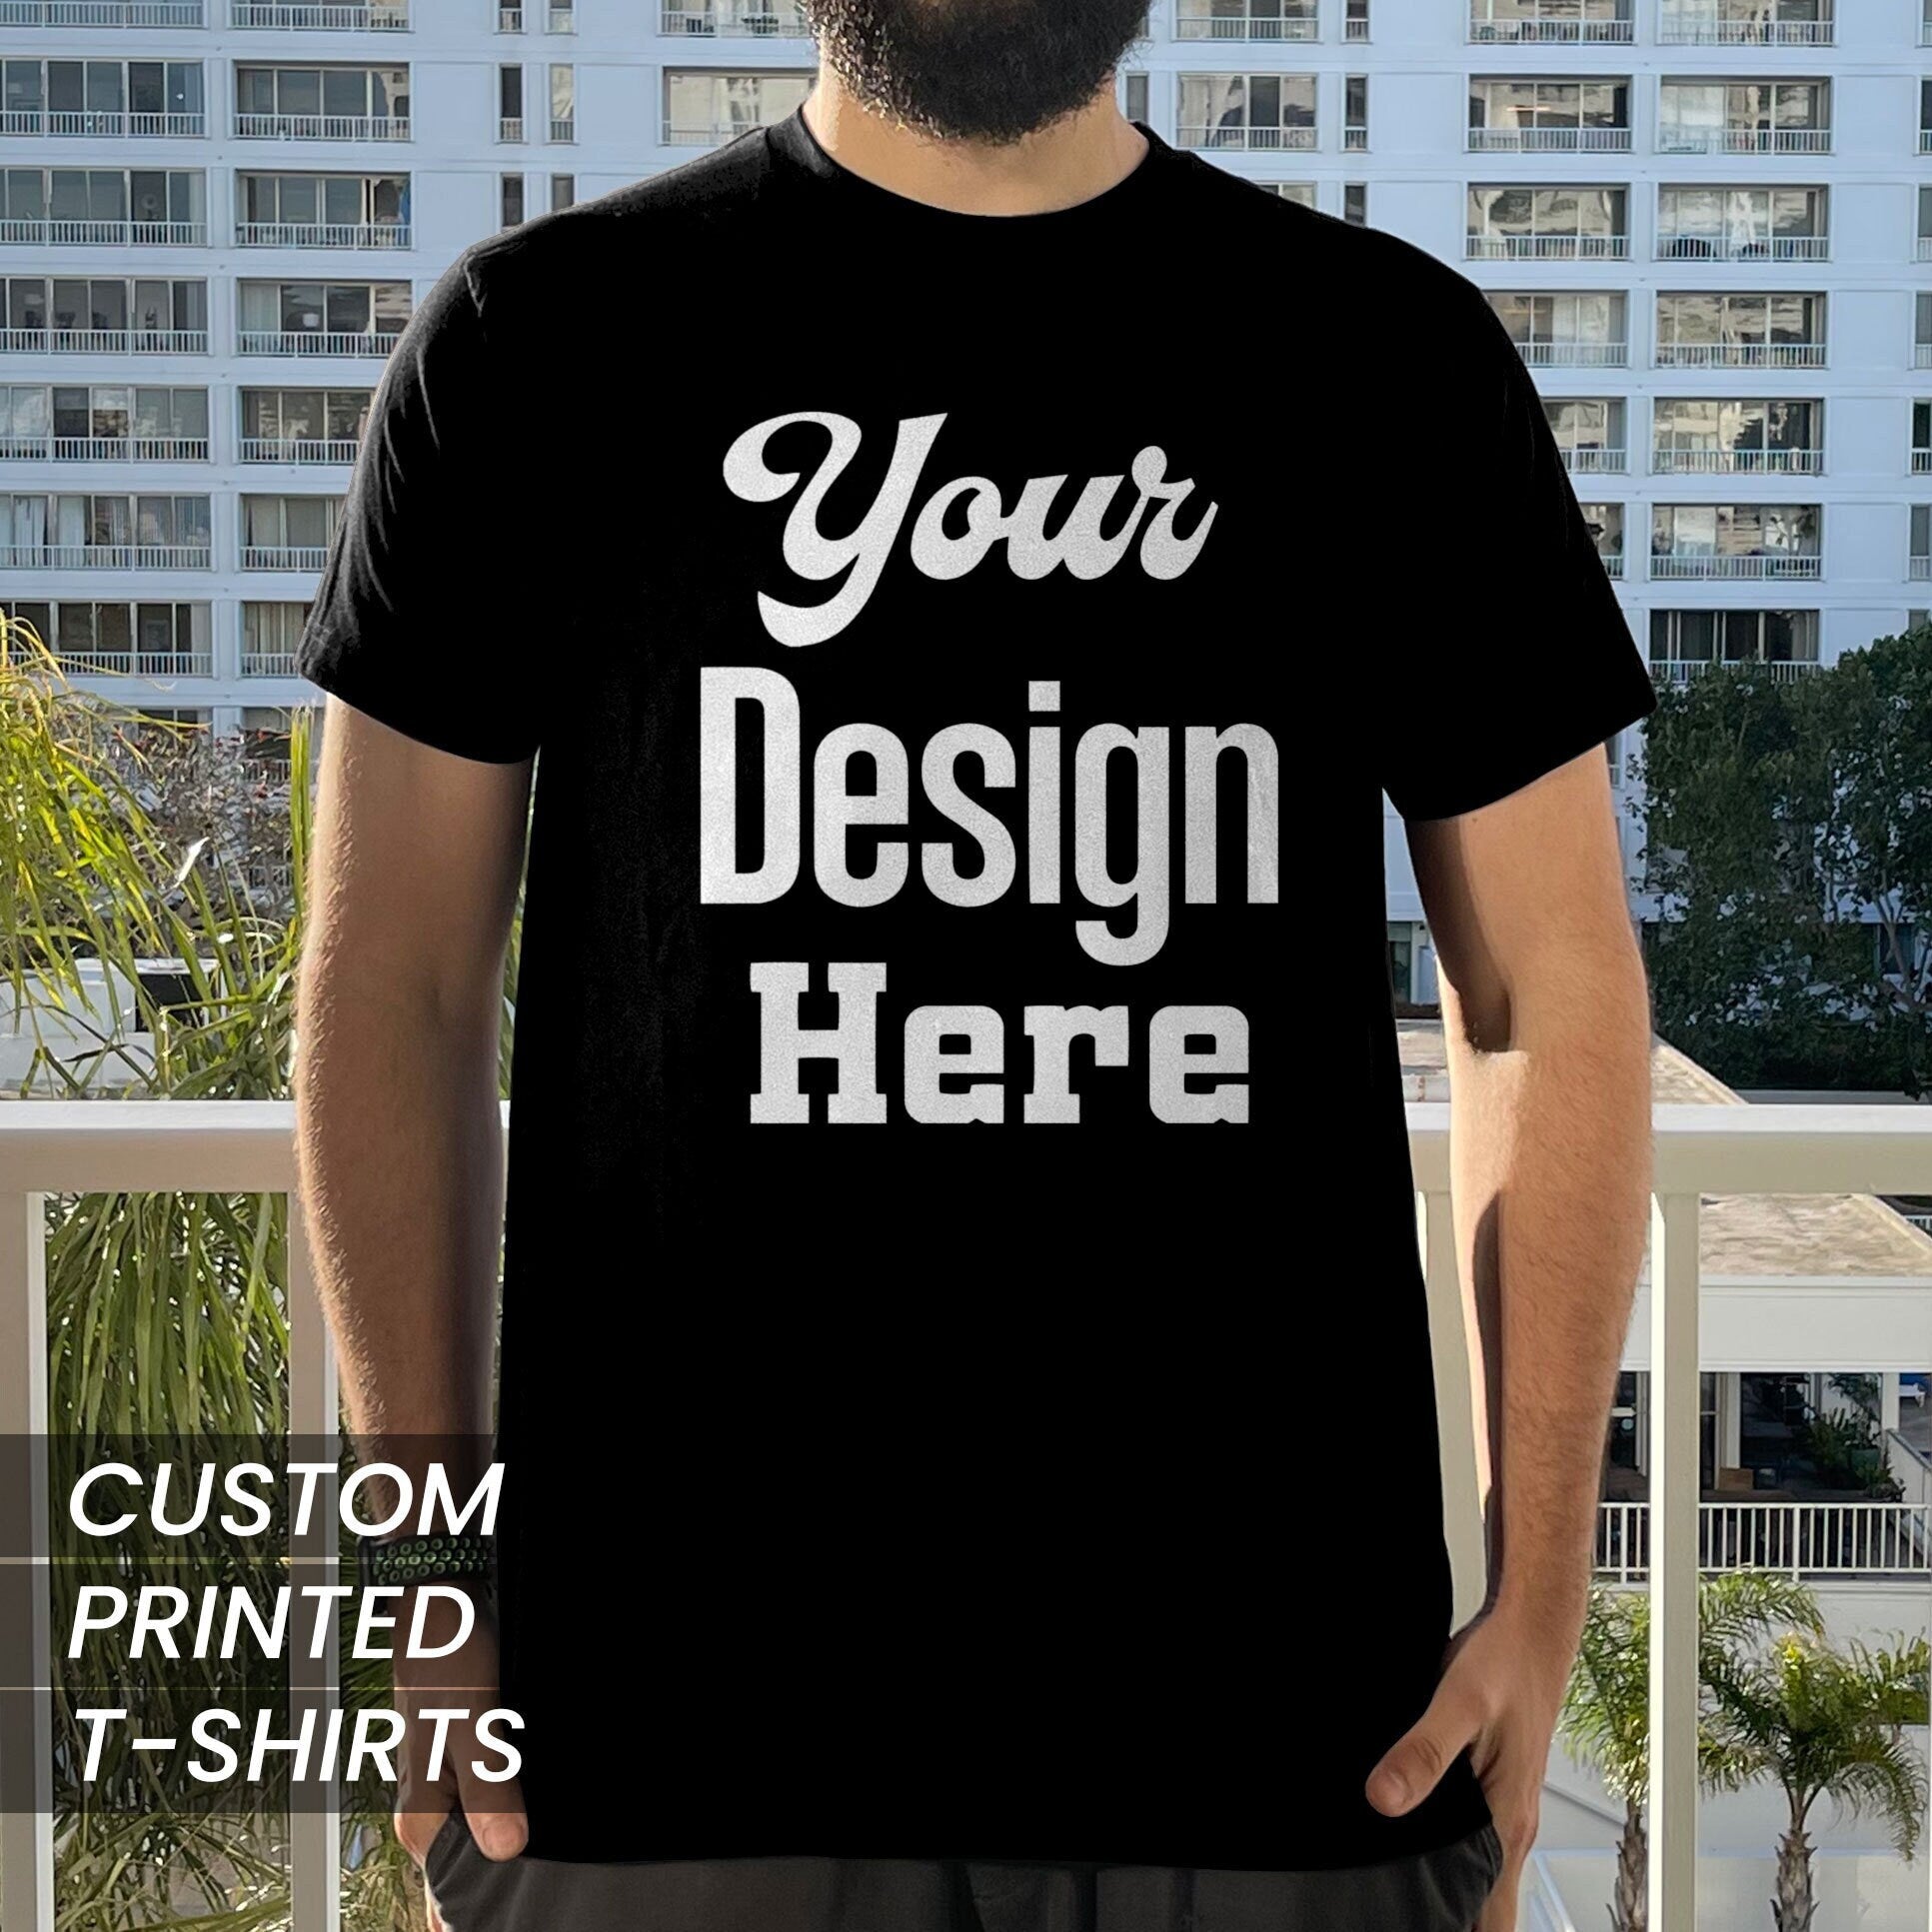 custom t-shirts with your design, photo, logo with no minimums. Ships next day